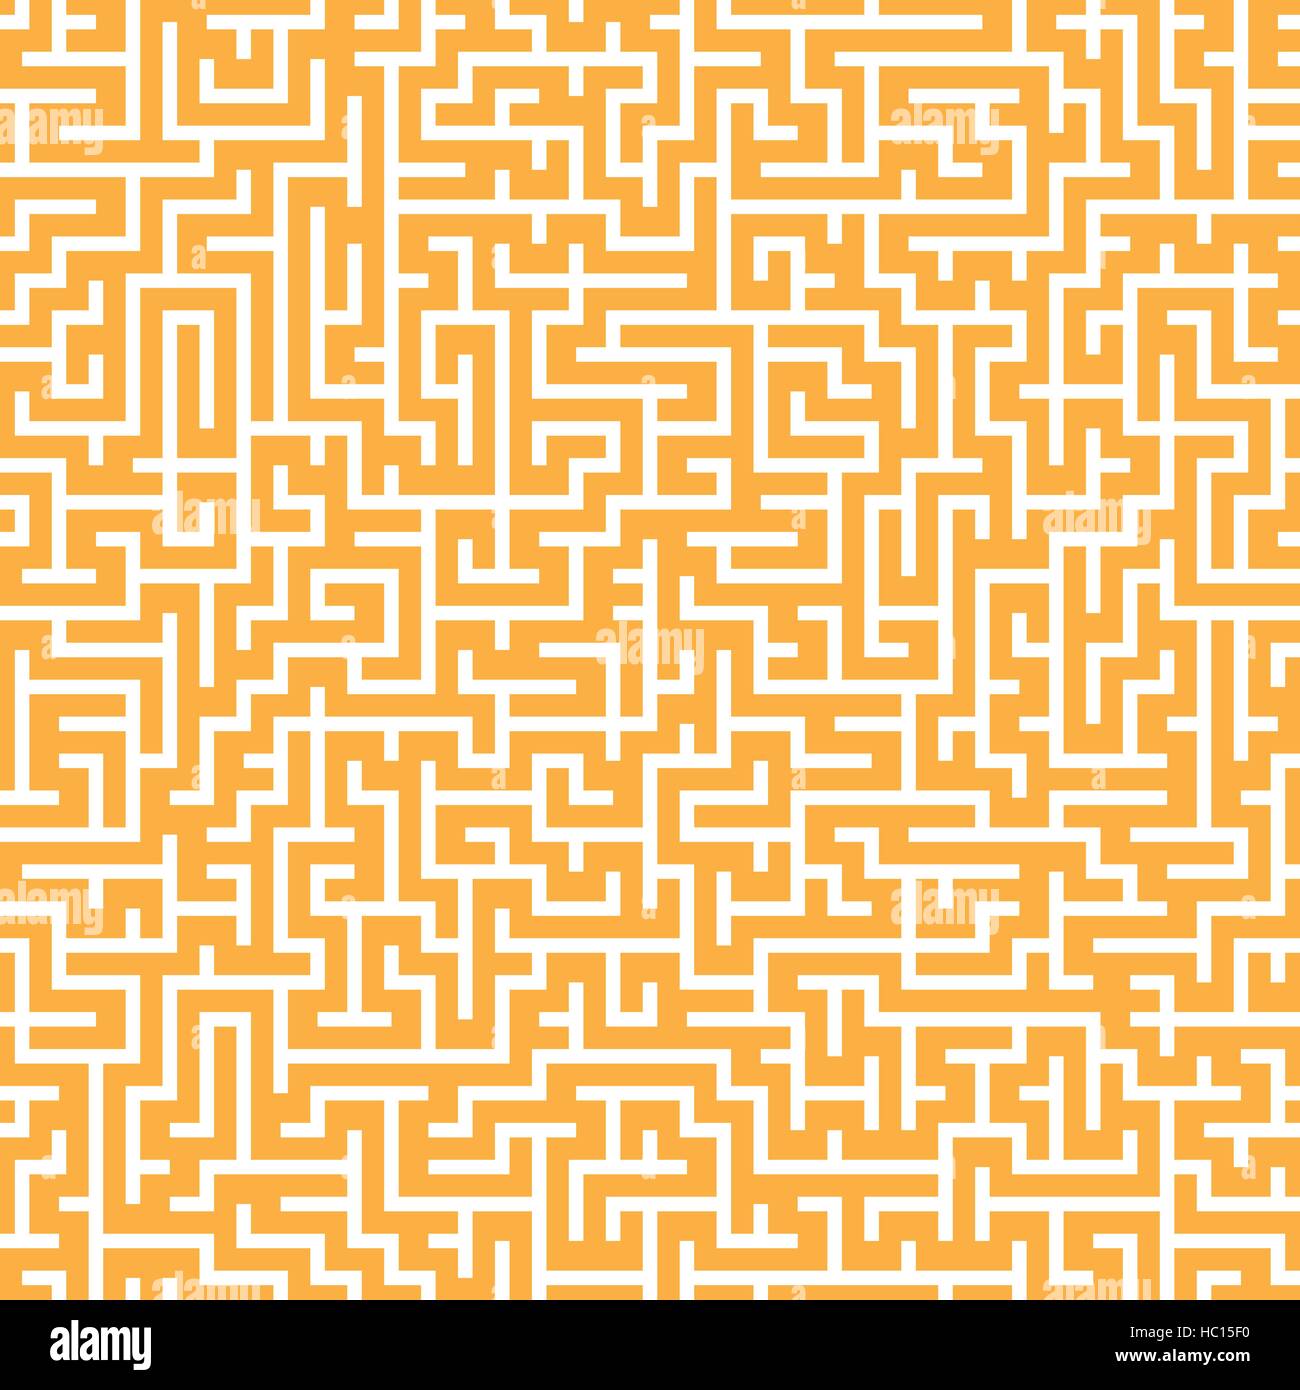 close-up look at complex square maze isolated on yellow background Stock Vector